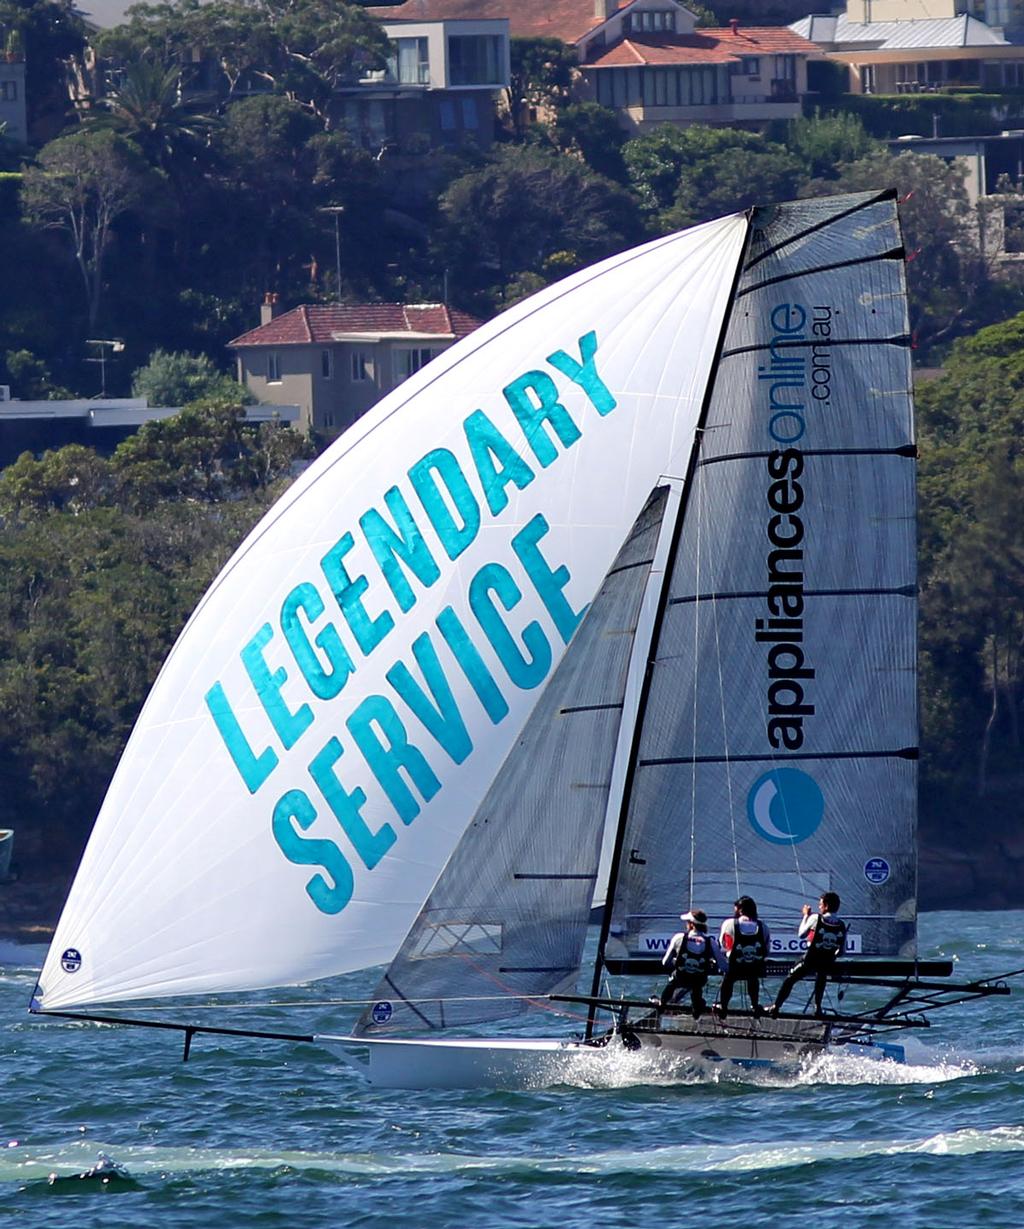 New appliancesonline shows early form - 18ft Skiffs NSW Championship 2015, Race 2 © Frank Quealey /Australian 18 Footers League http://www.18footers.com.au